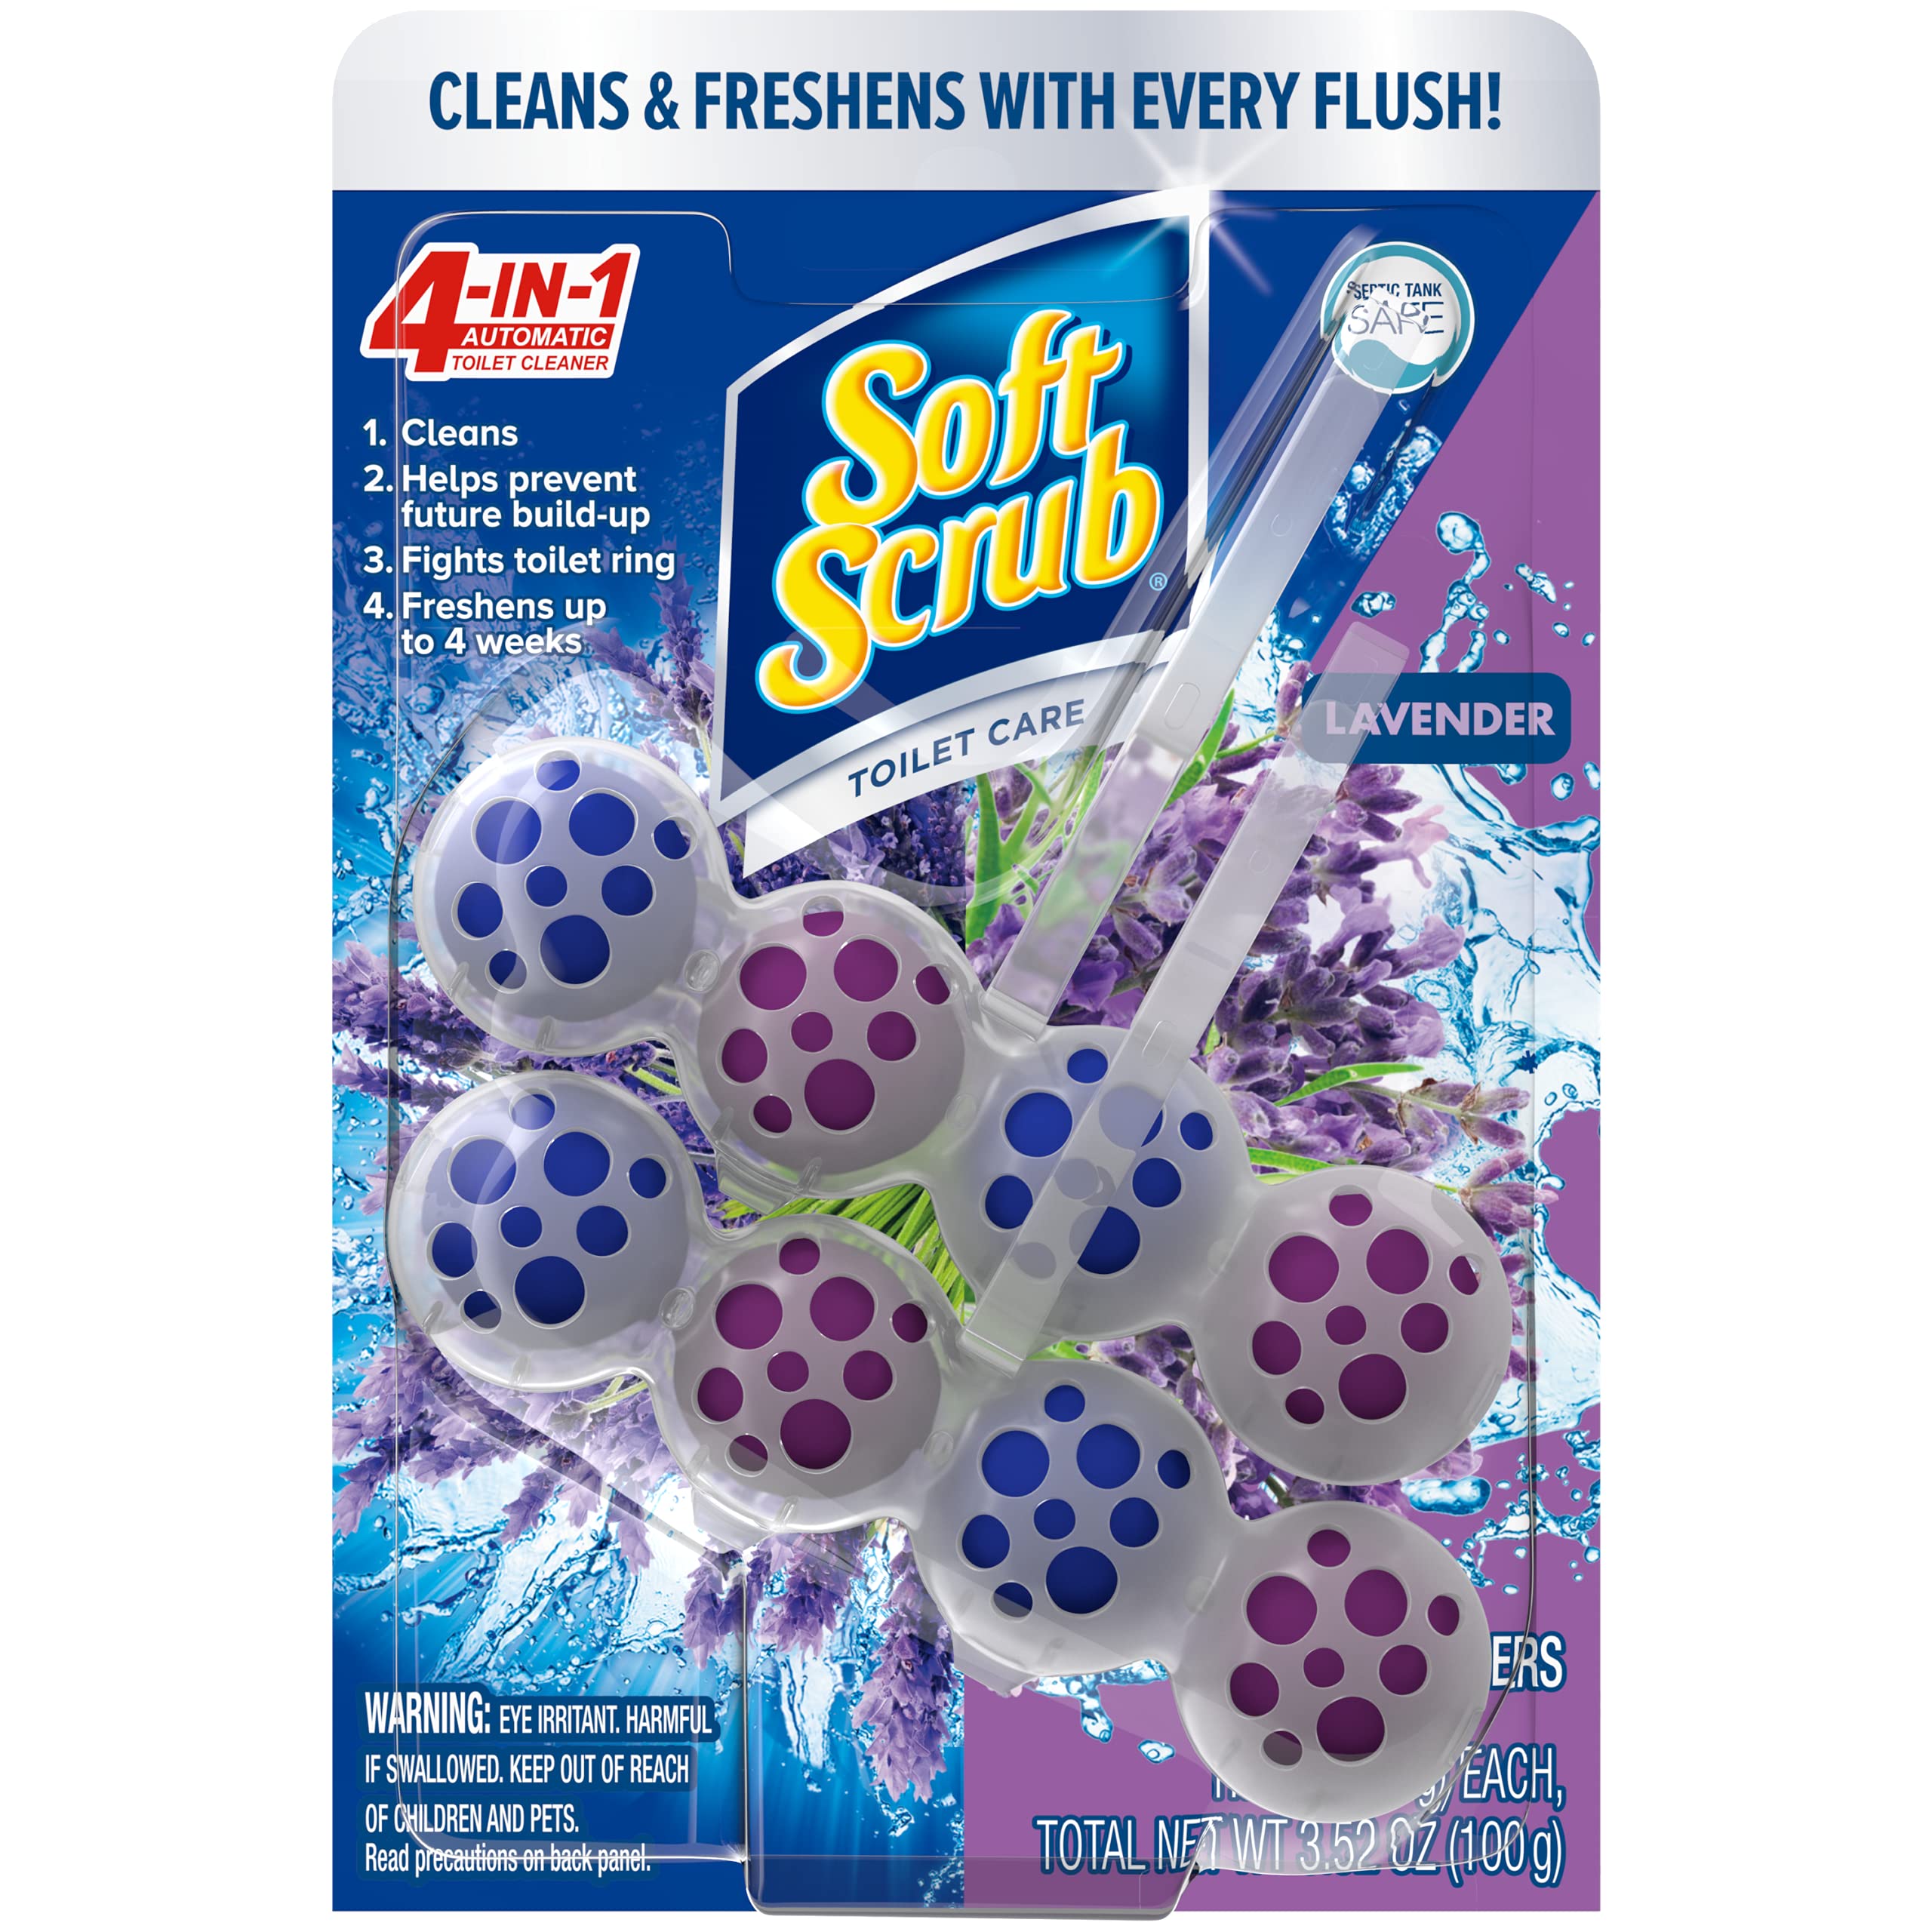 2-Count 1.76-Oz Soft Scrub 4-in-1 Rim Hanger Toilet Bowl Cleaner (Lavender) $3.60 ($1.80 Each) w/ S&S + Free Shipping w/ Prime or on $35+